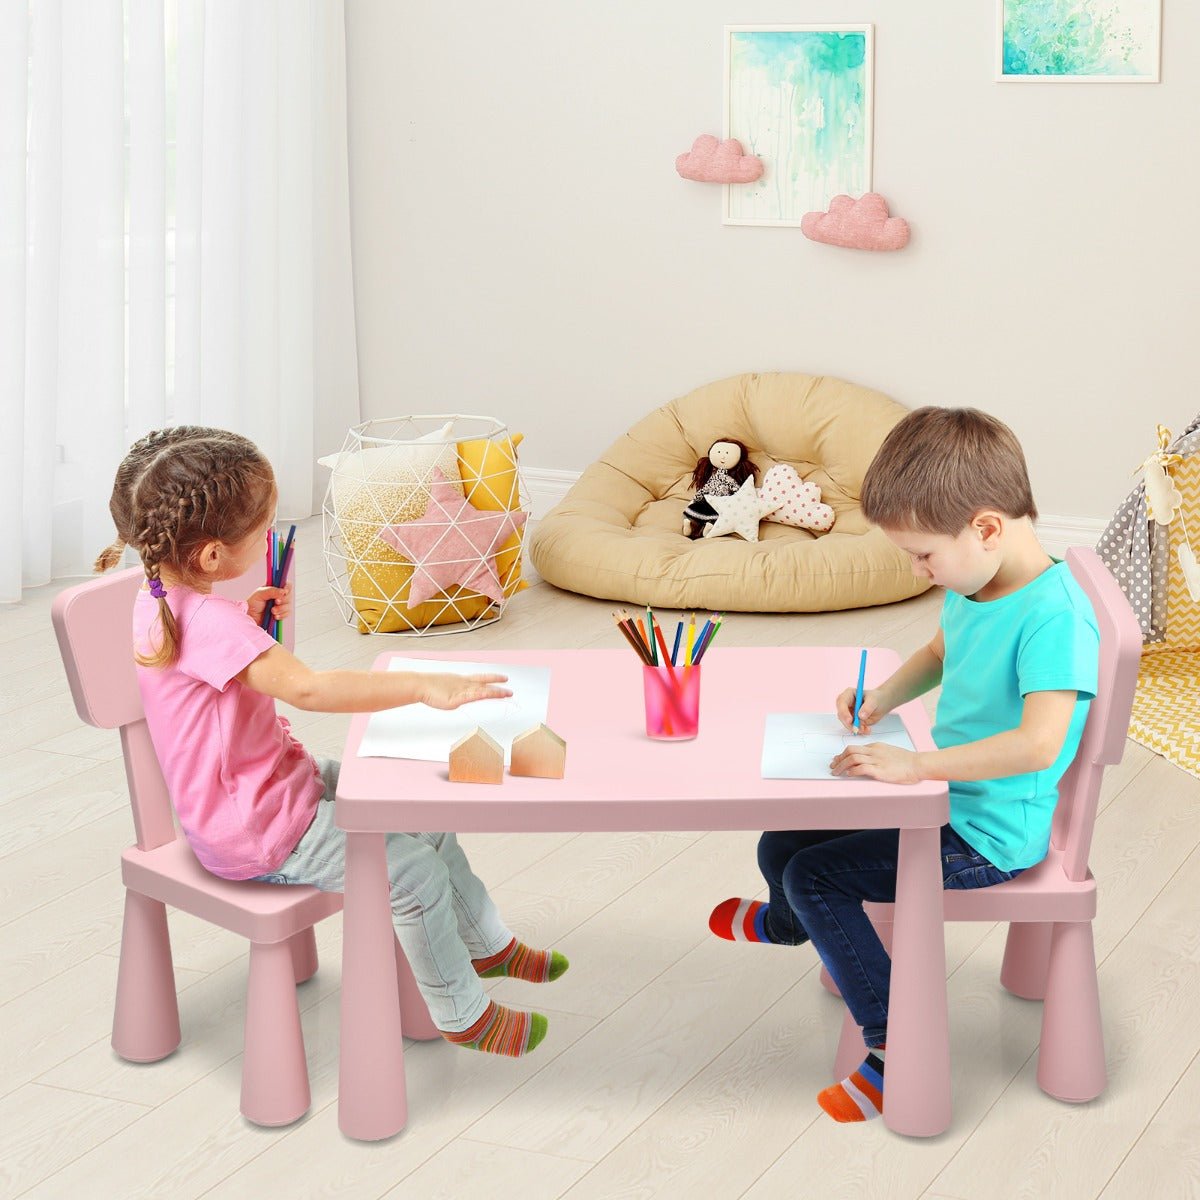 3-Piece Pink Kids Table and Chairs Set - A Place for Stories